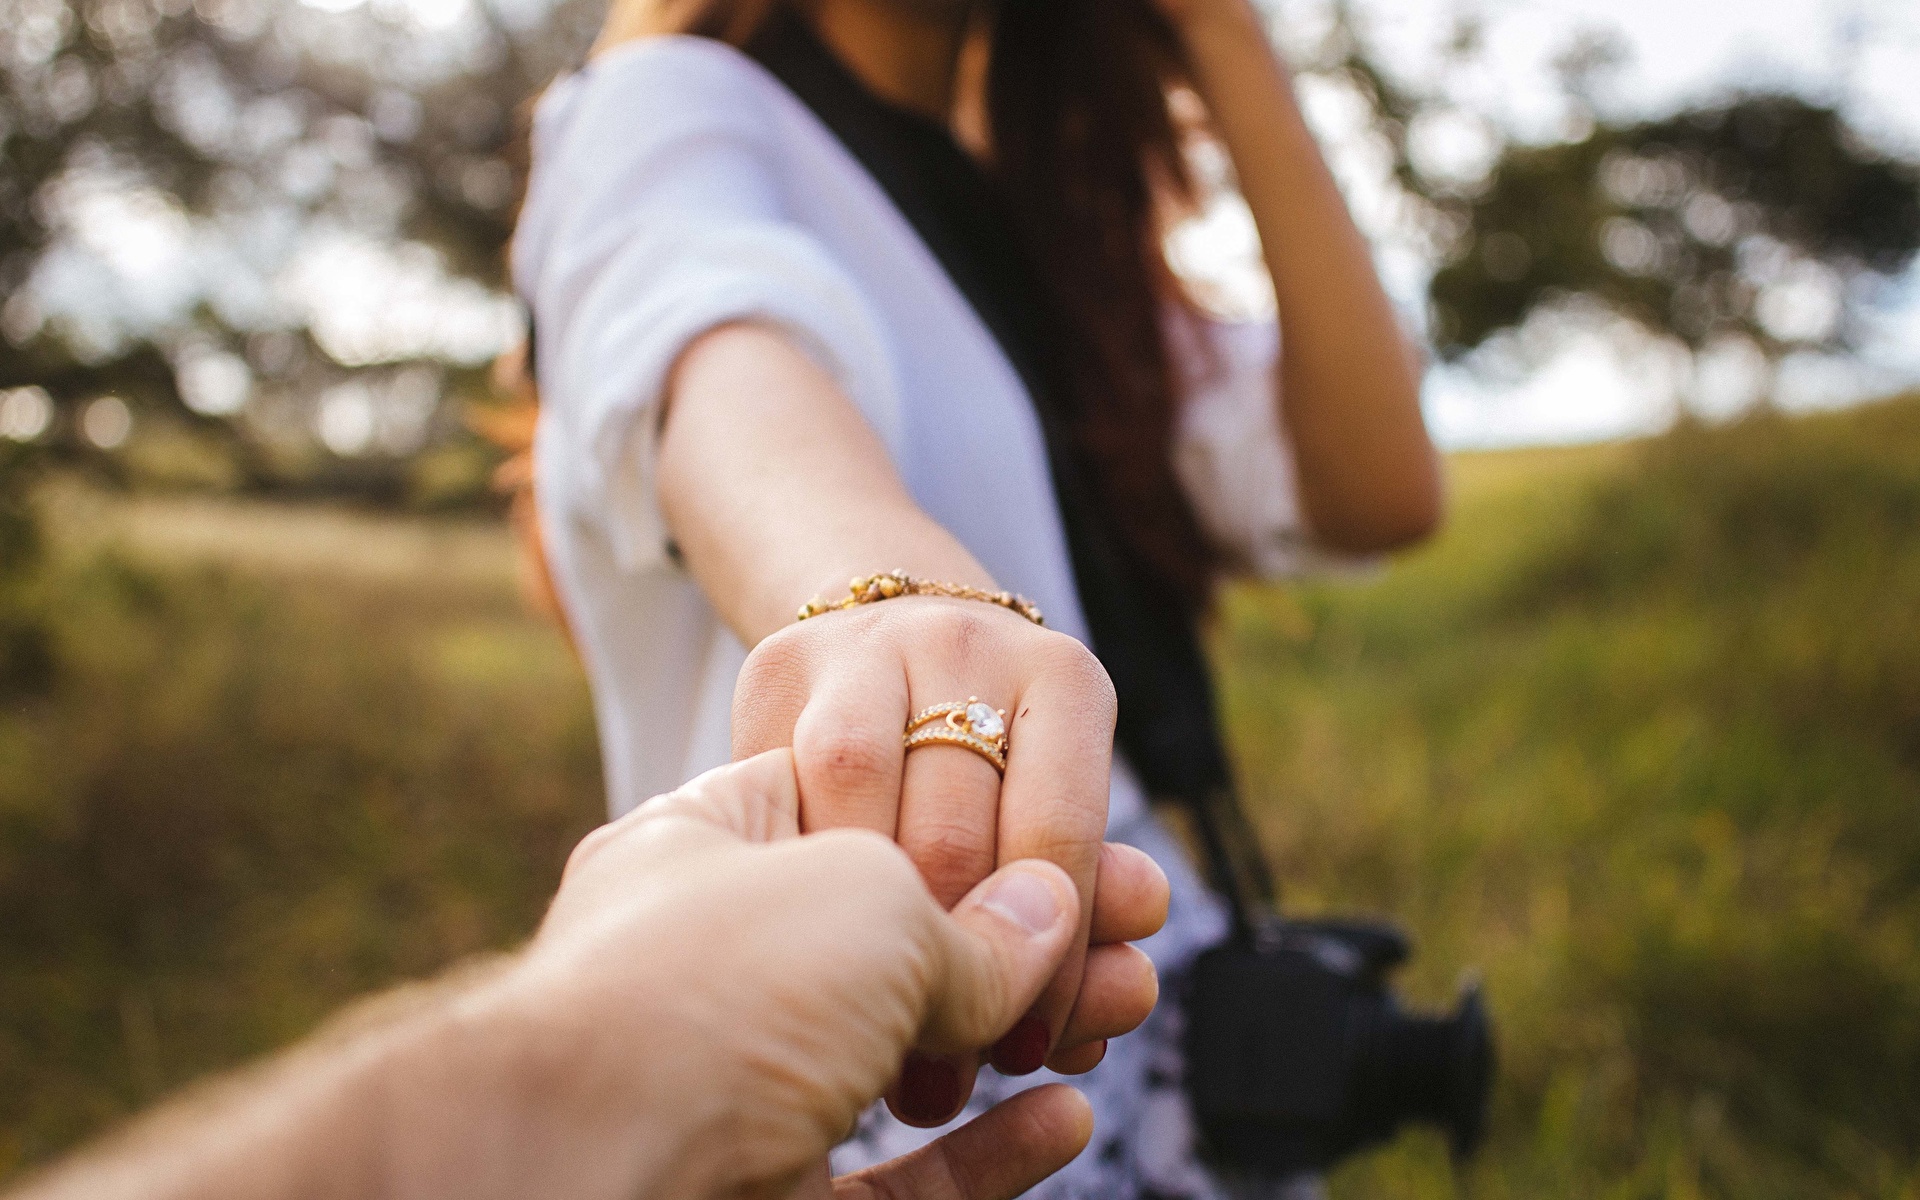 A Girl is Showing Clean and Beautiful Hand by Wear Gold Ring in Finger  Stock Image - Image of health, fitted: 160854671